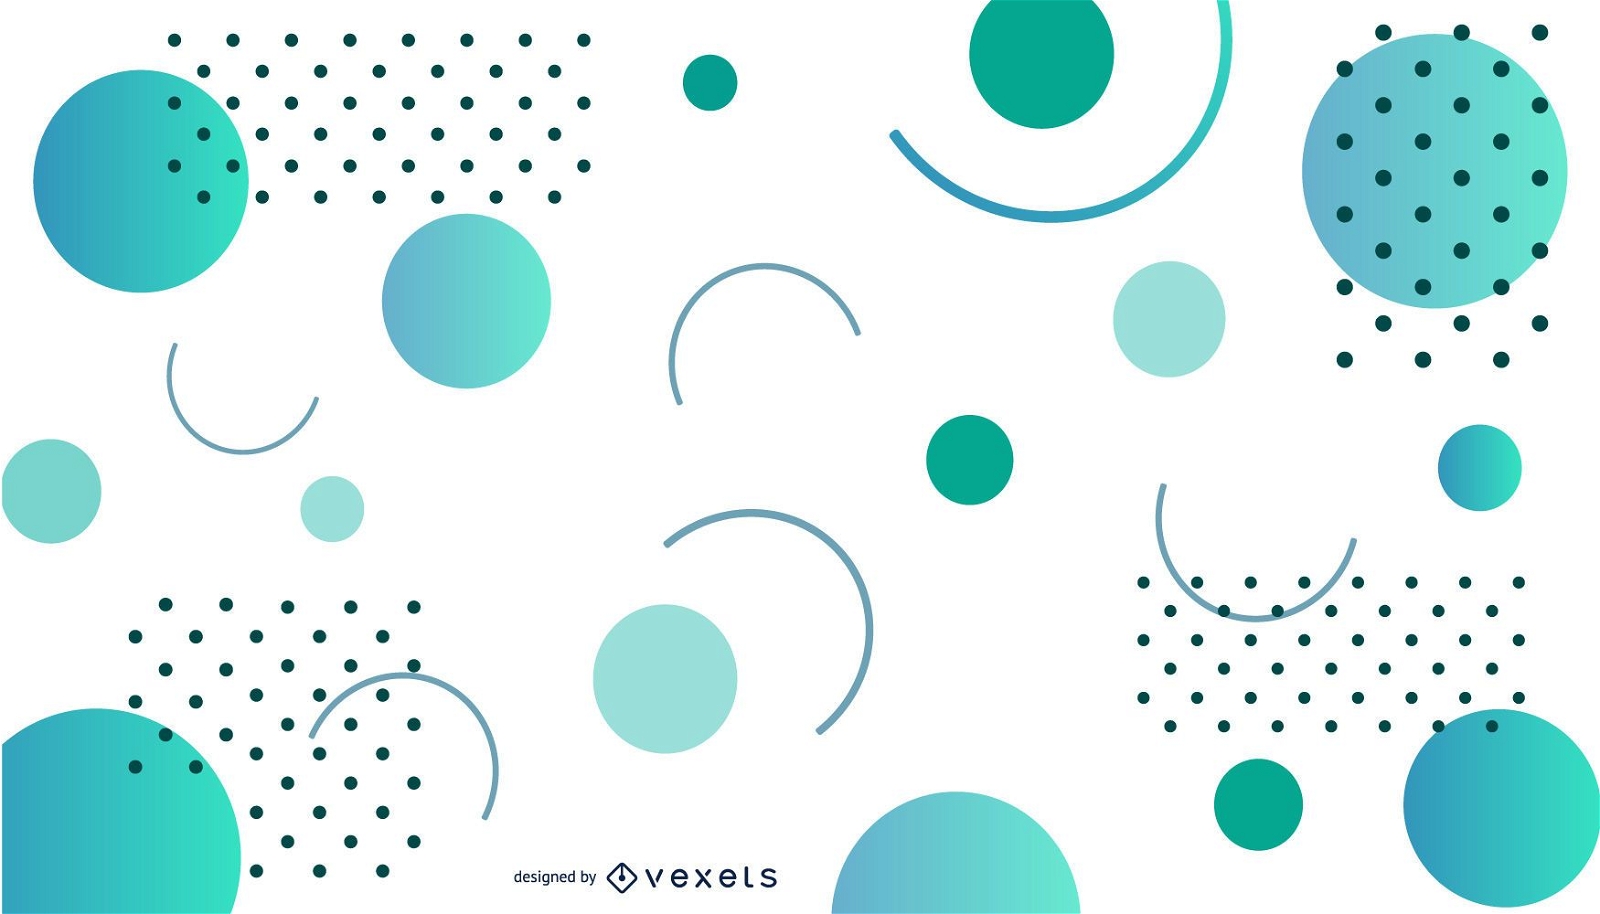 Abstract shapes and circles background design